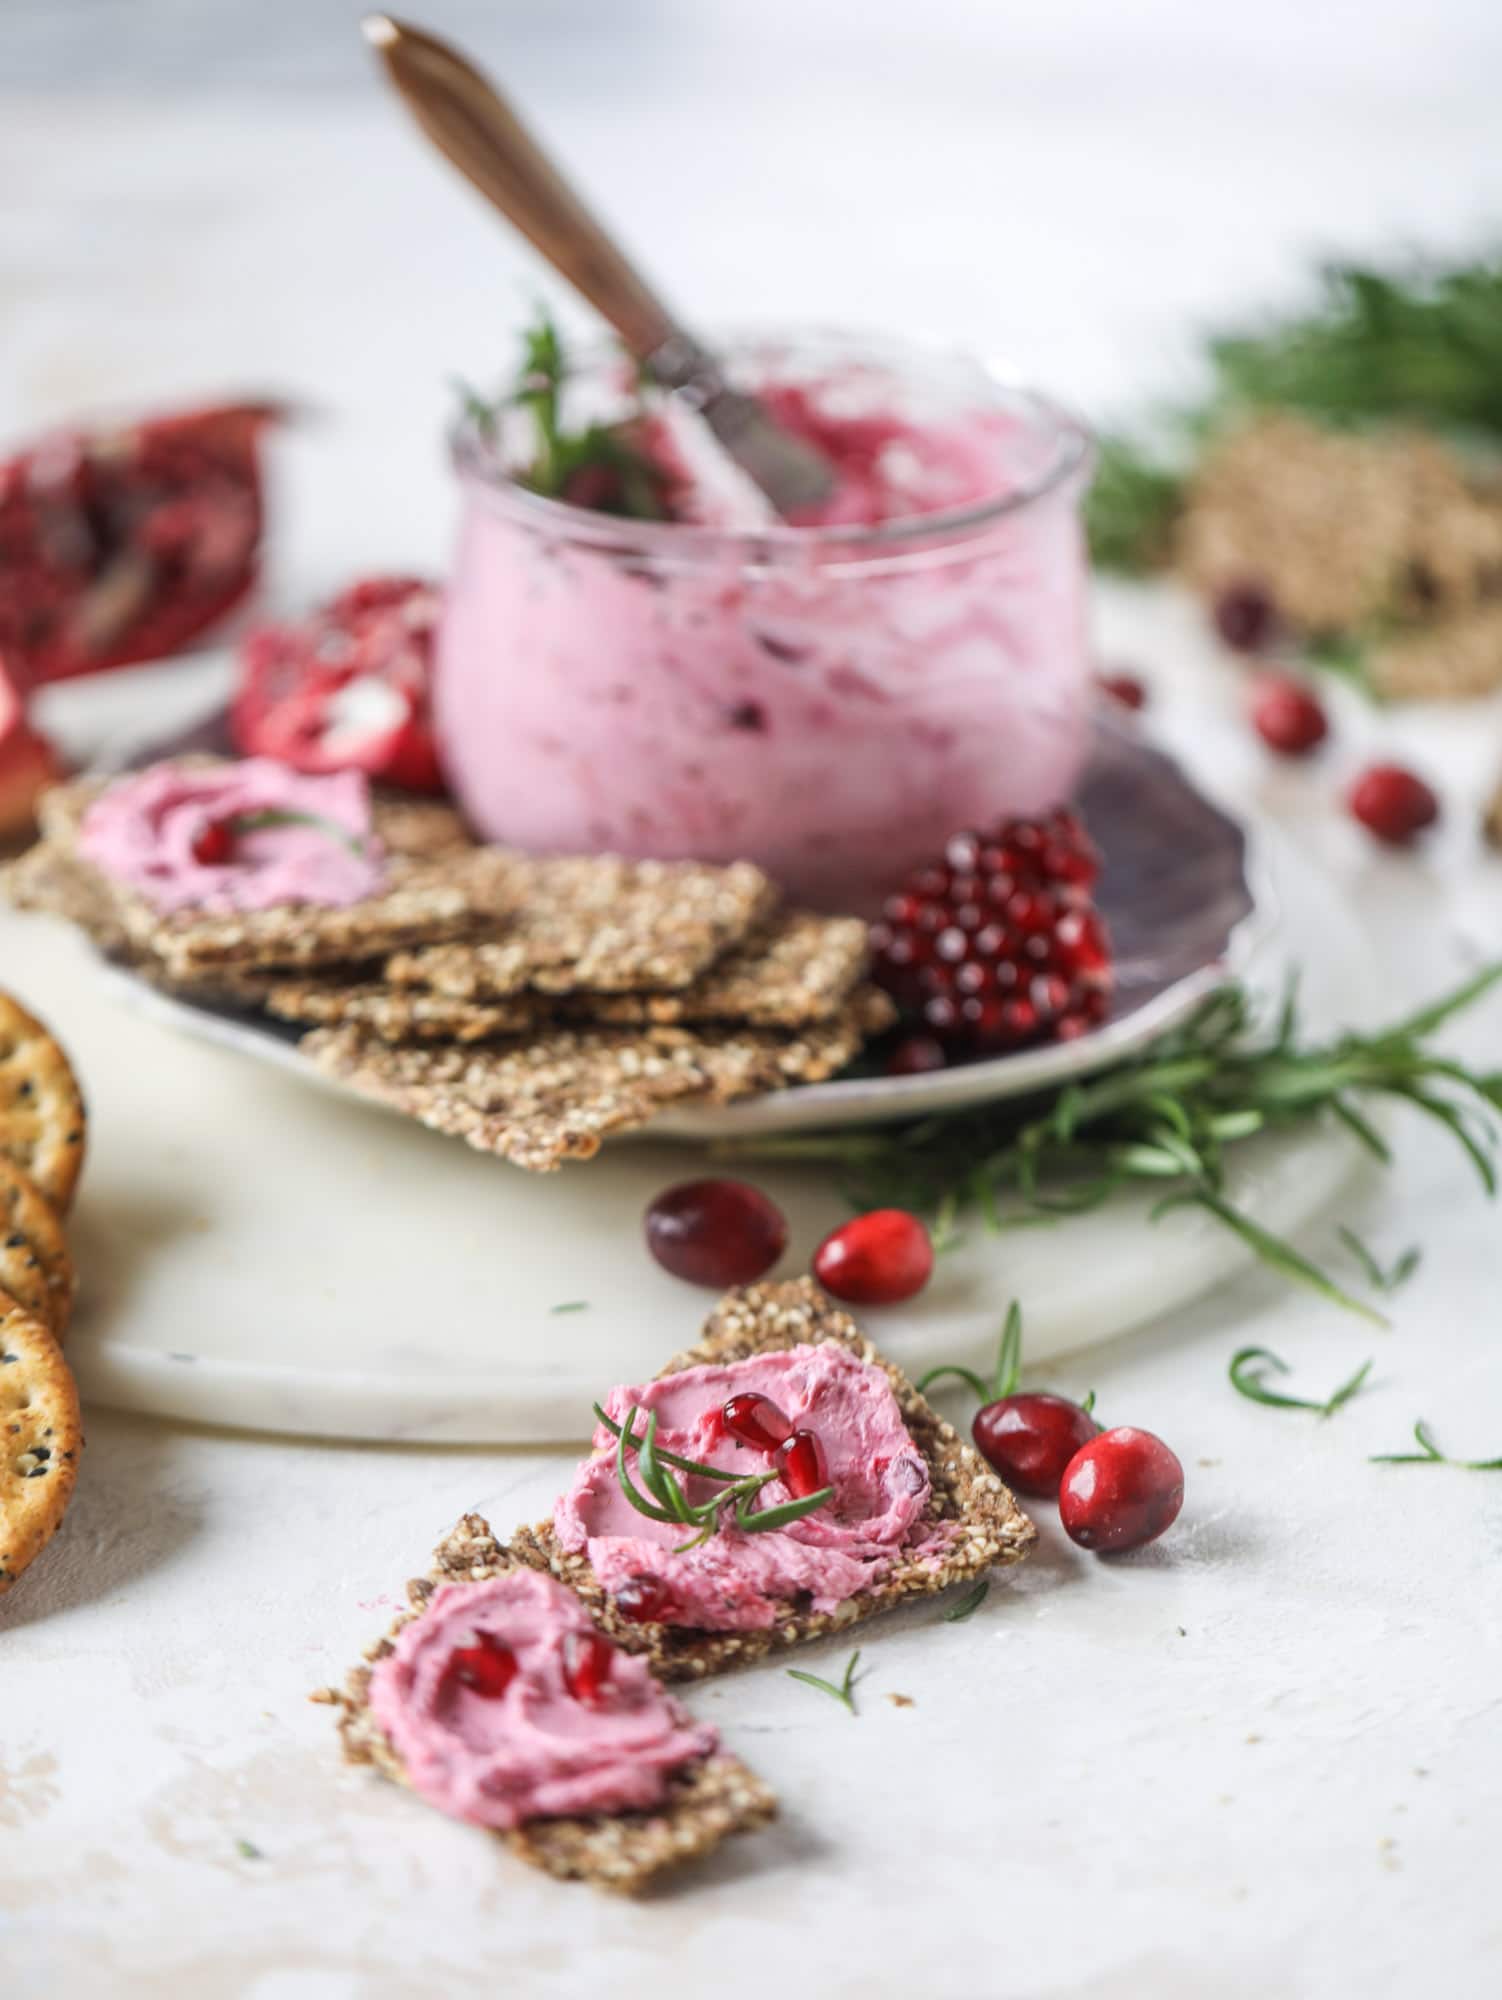 This whipped cranberry goat cheese spread is the perfect holiday appetizer! You can make it ahead of time and serve it with a cheese board or bread and crackers - before or during the meal! Plus it's super pretty too! I howsweeteats.com #cranberry #goatcheese